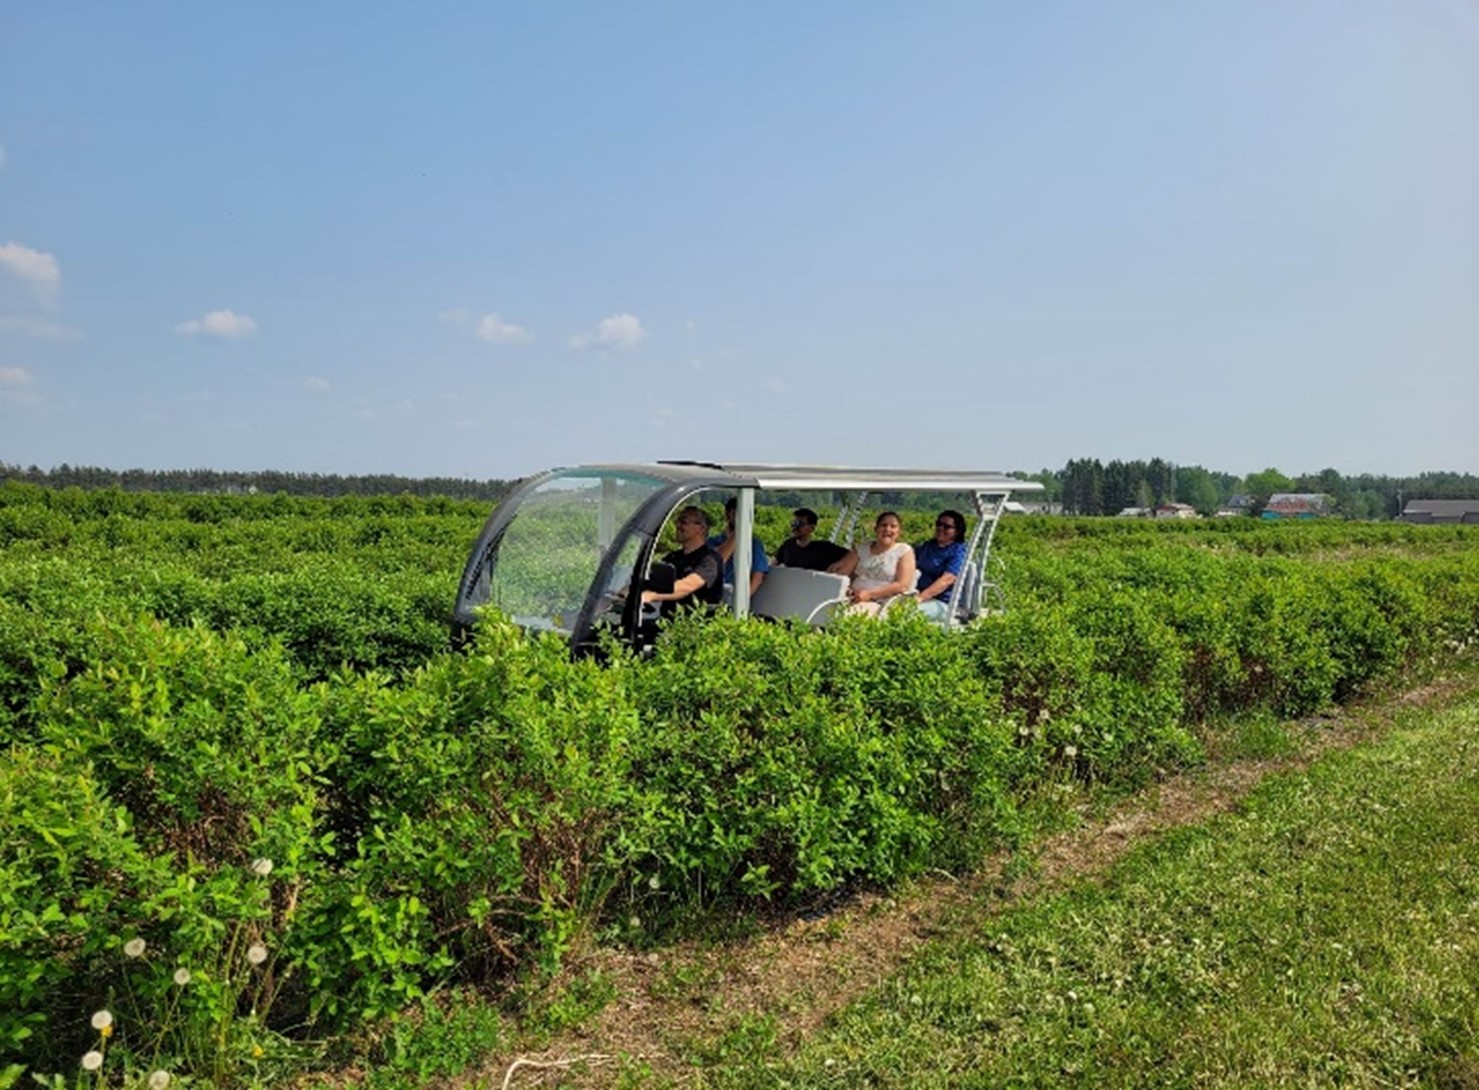 Five people in a vehicle adapted to tour a haskap berry field